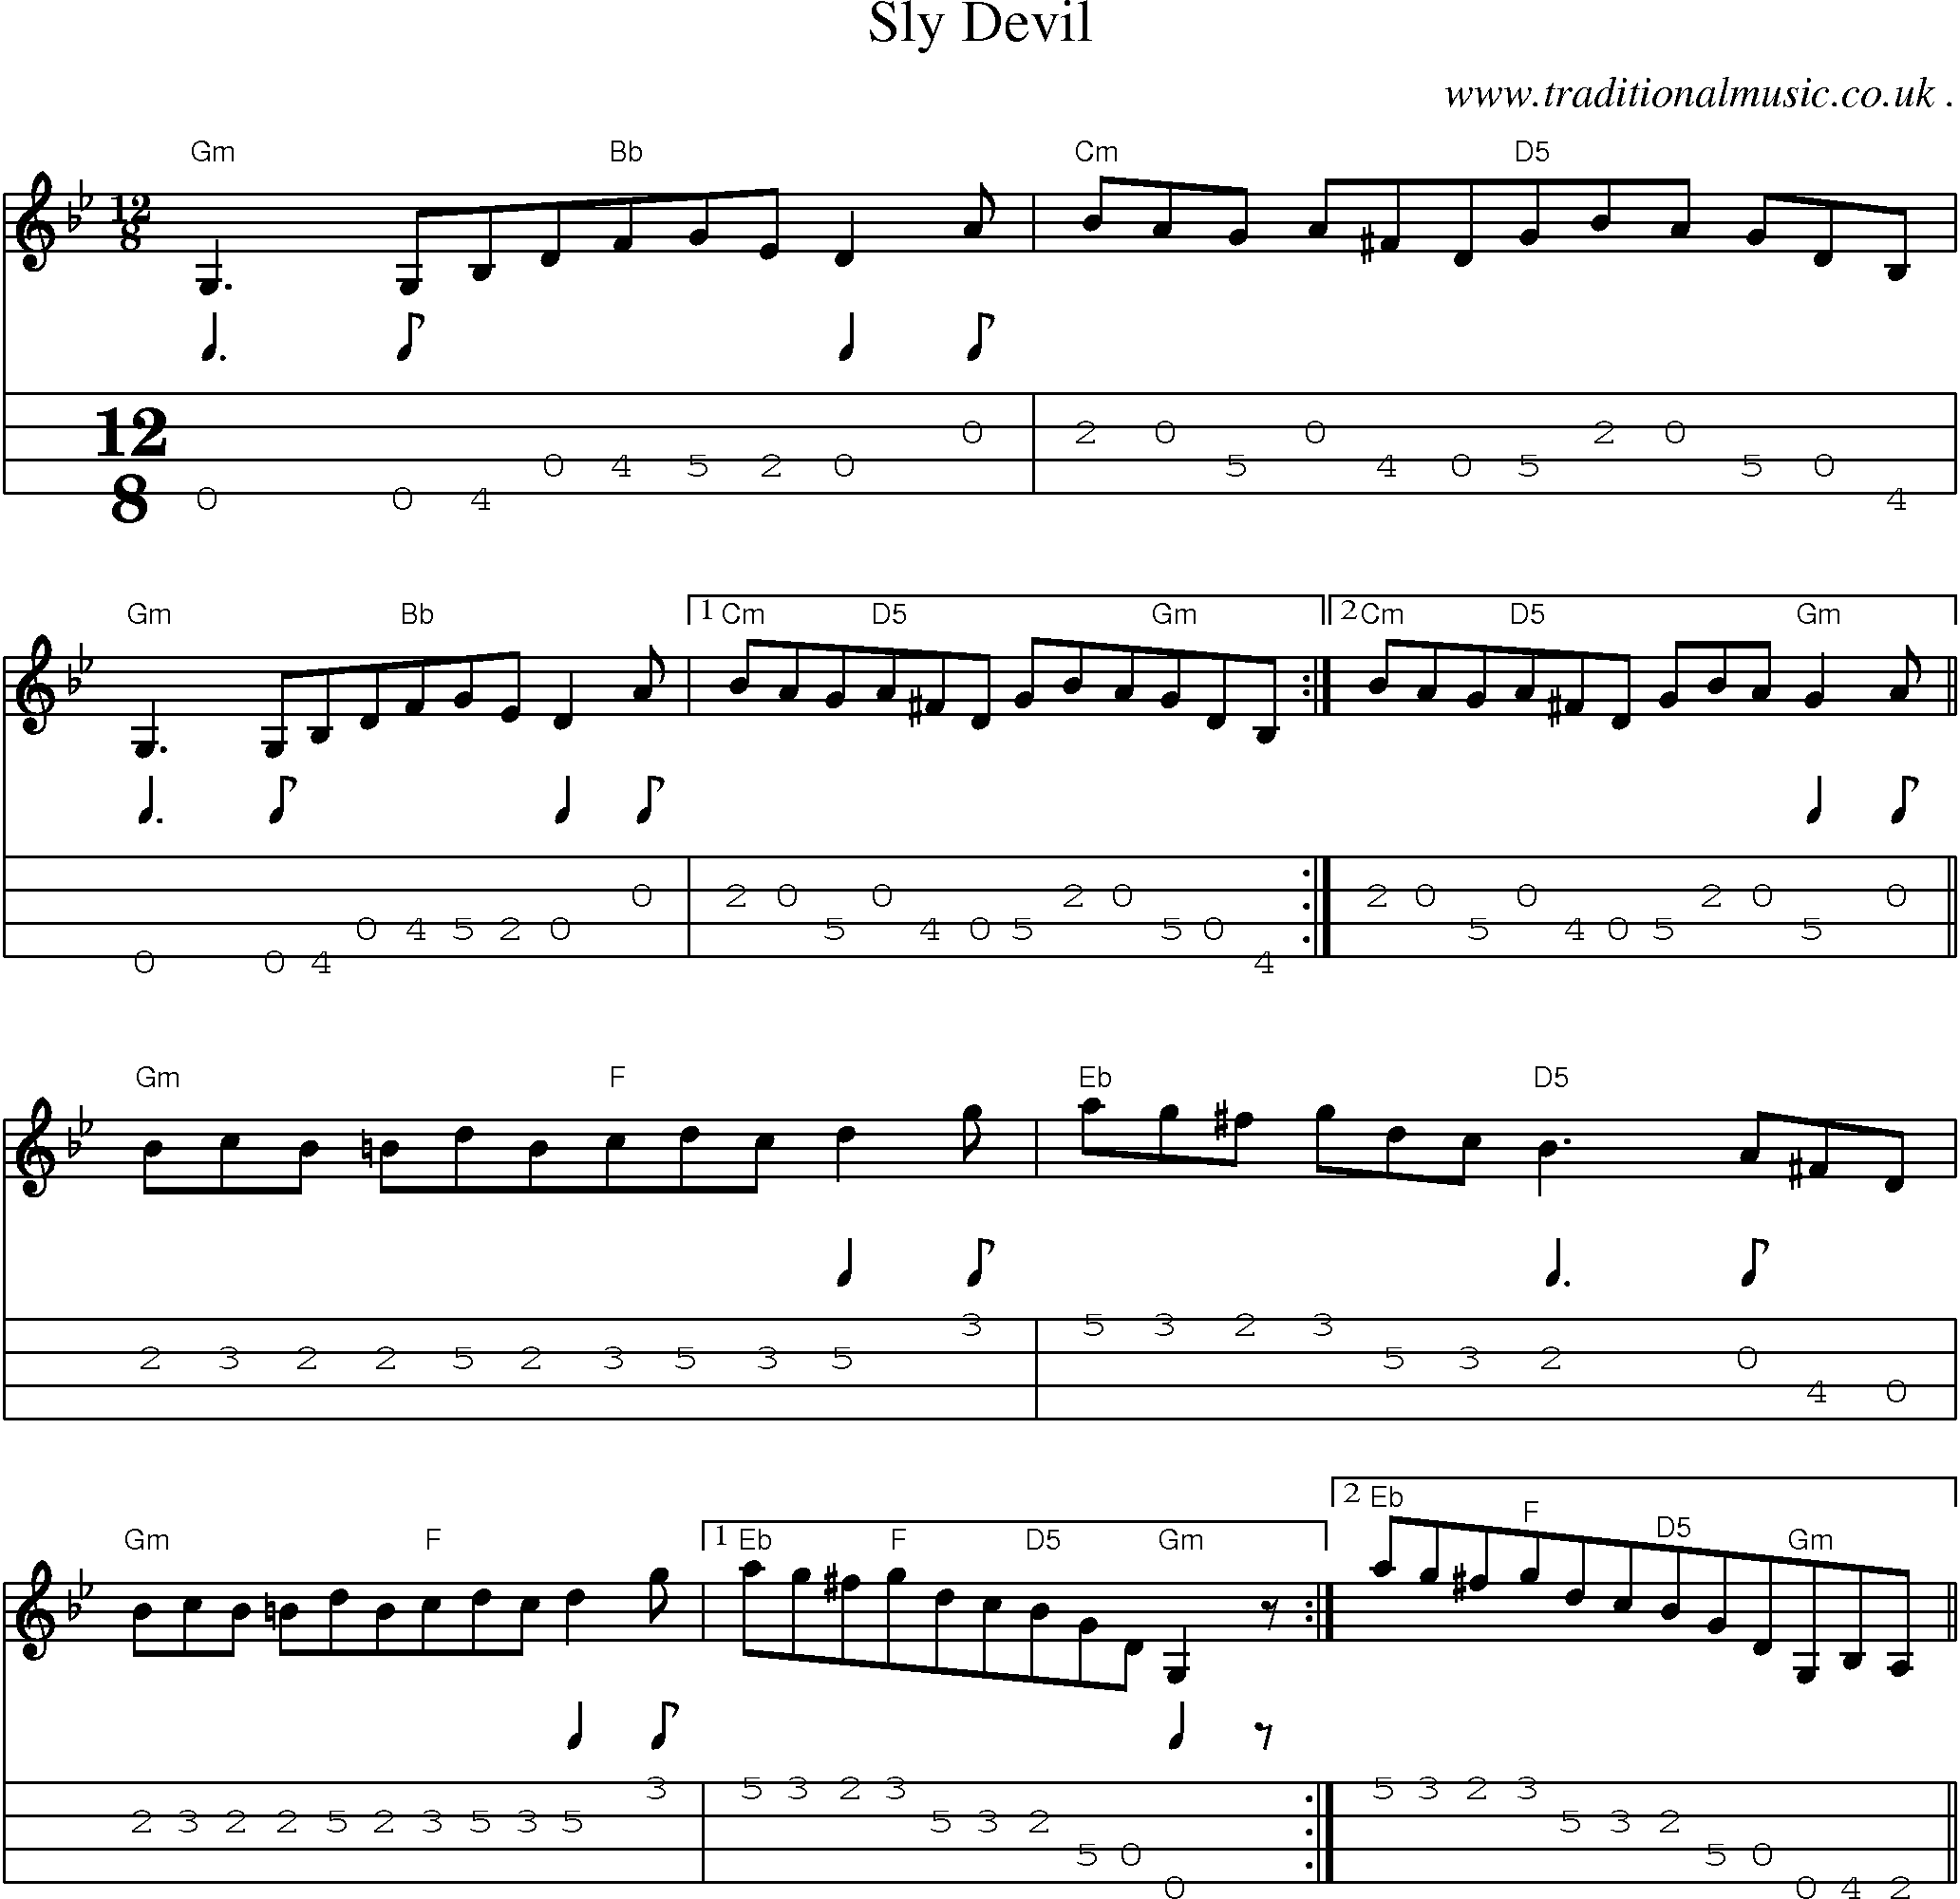 Sheet-Music and Mandolin Tabs for Sly Devil